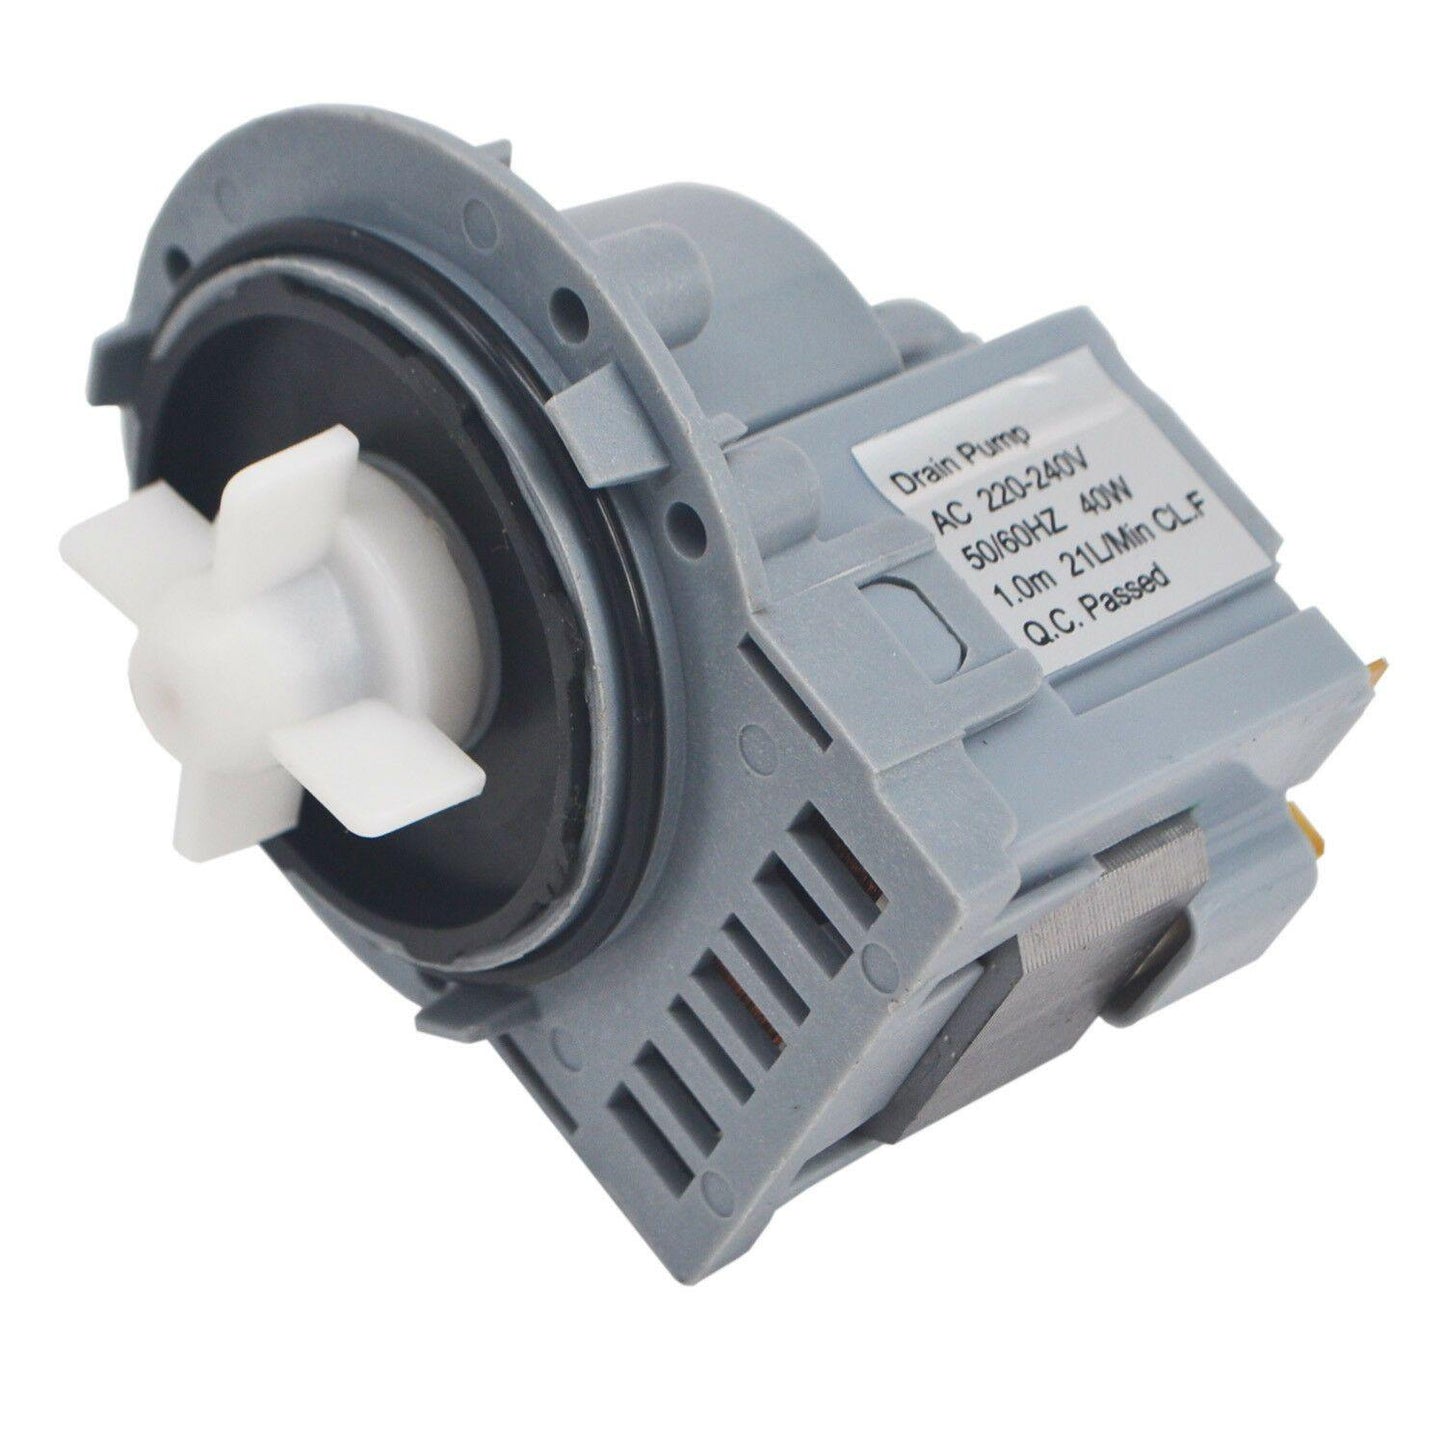 Water Drain Pump For Fisher & Paykel WH7560J3 93249-A Washing Machine Washer Sparesbarn